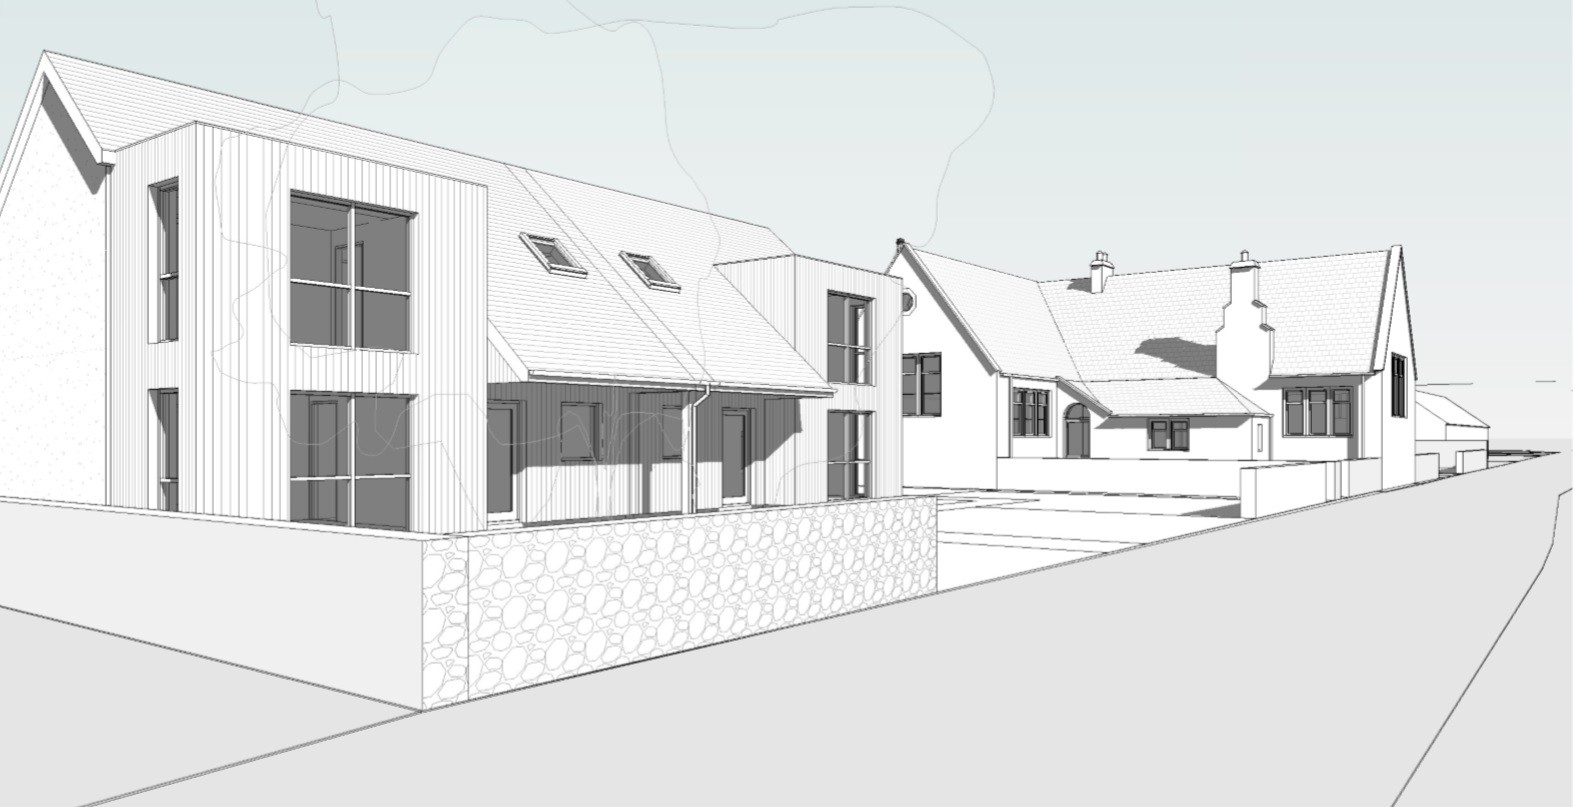 Homes planned at former Inverness school